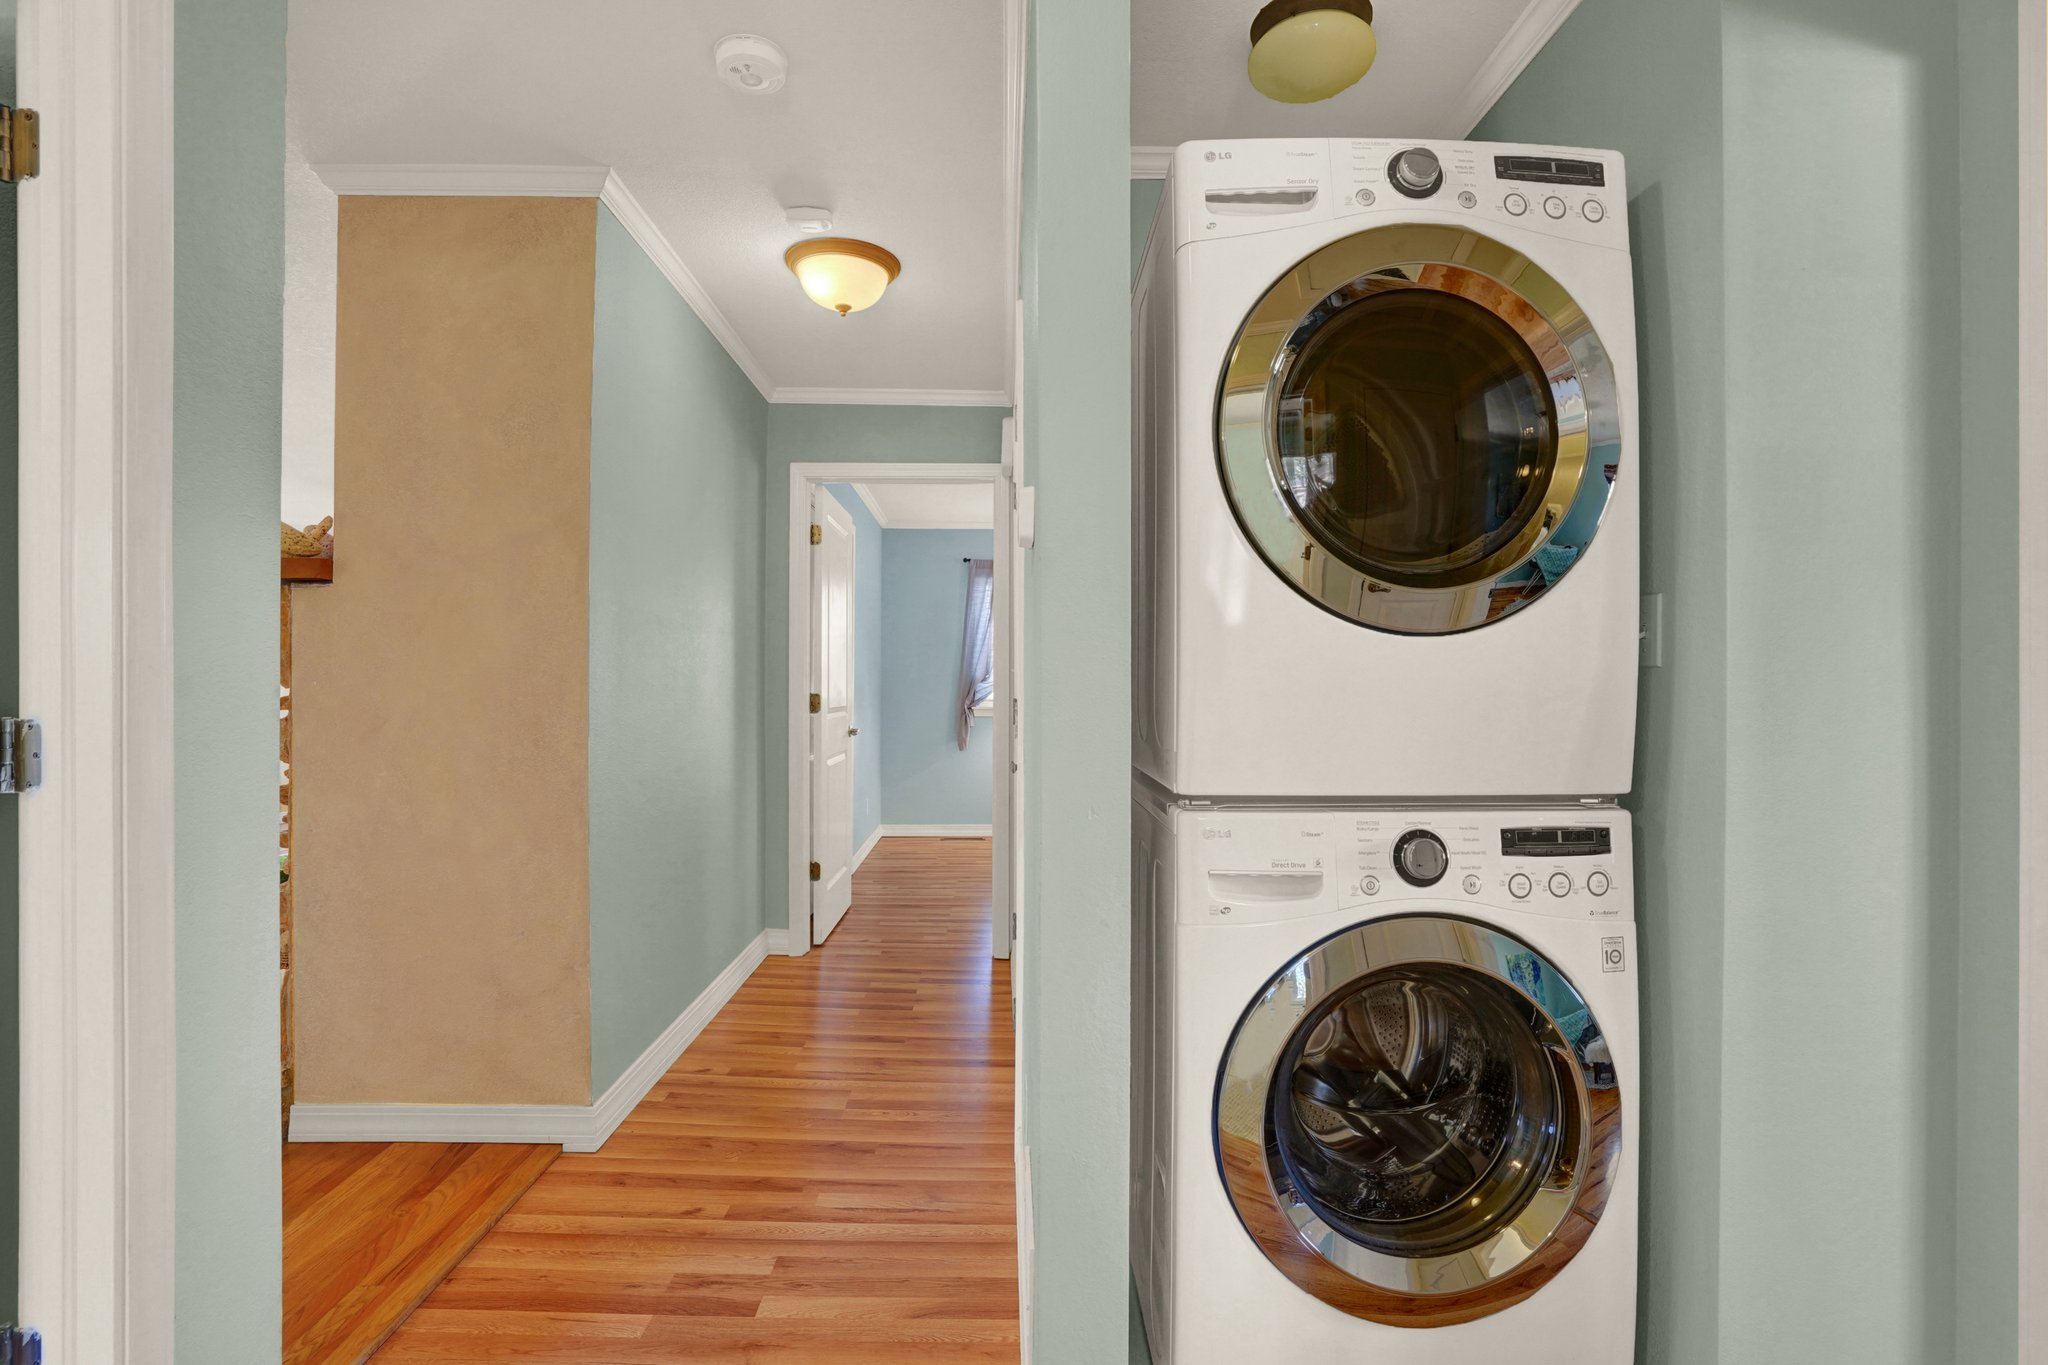 Clothes washer and GAS dryer stay.